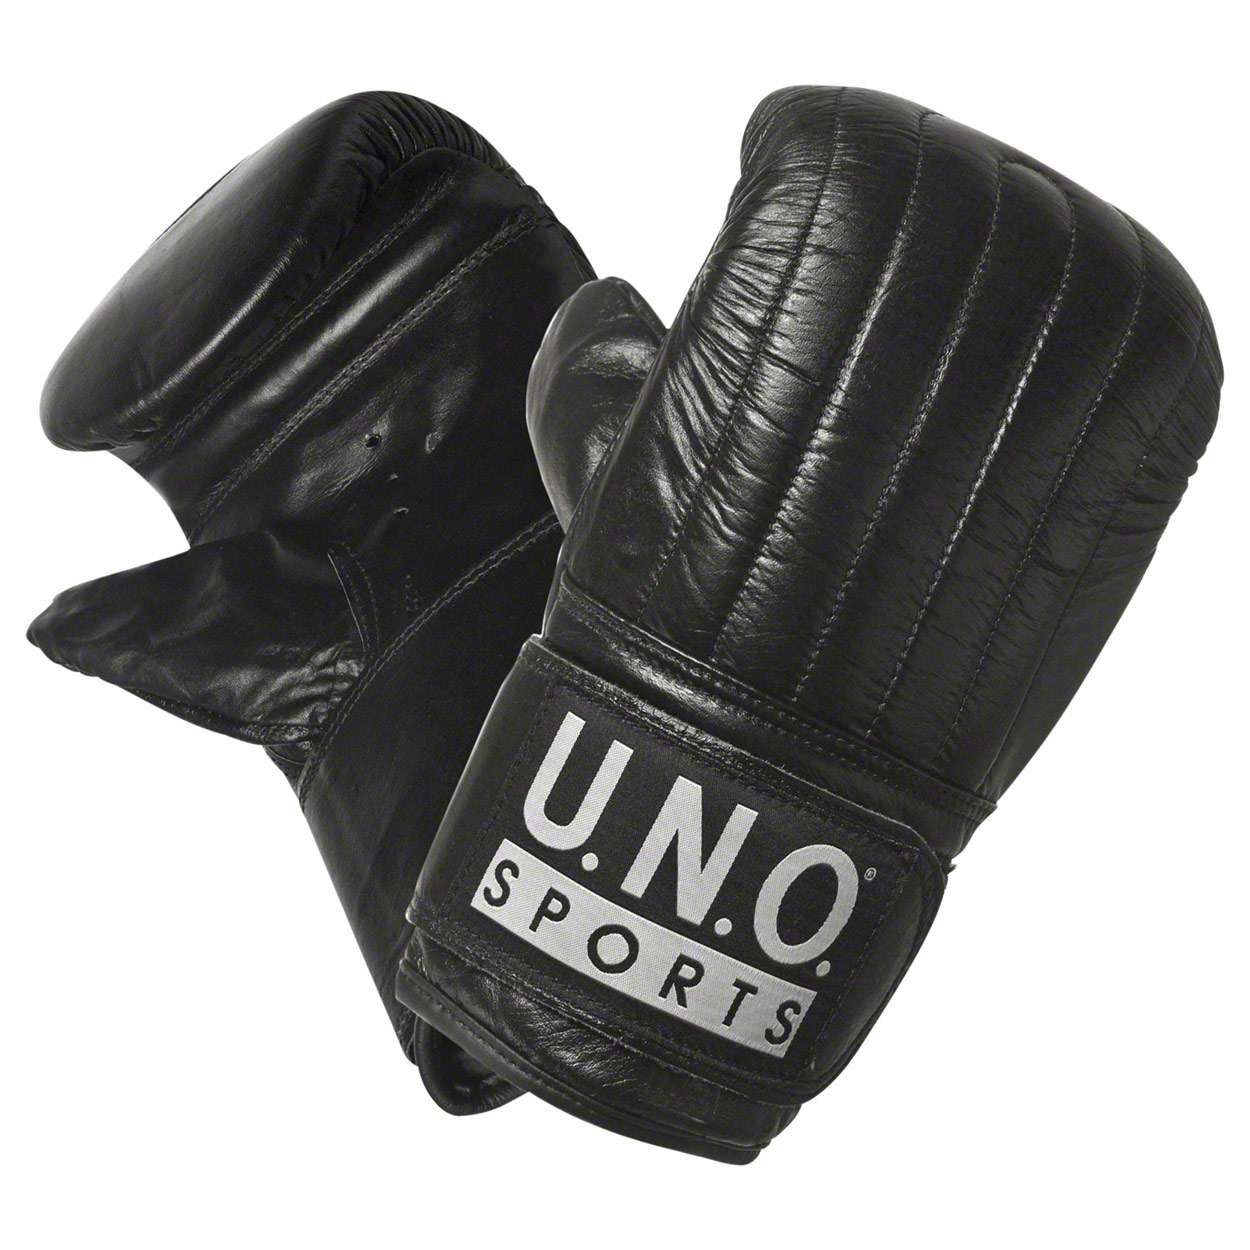 size fitness Punch XL, Pro, gloves pair U.N.O. buy Sport-Tec Sports online |